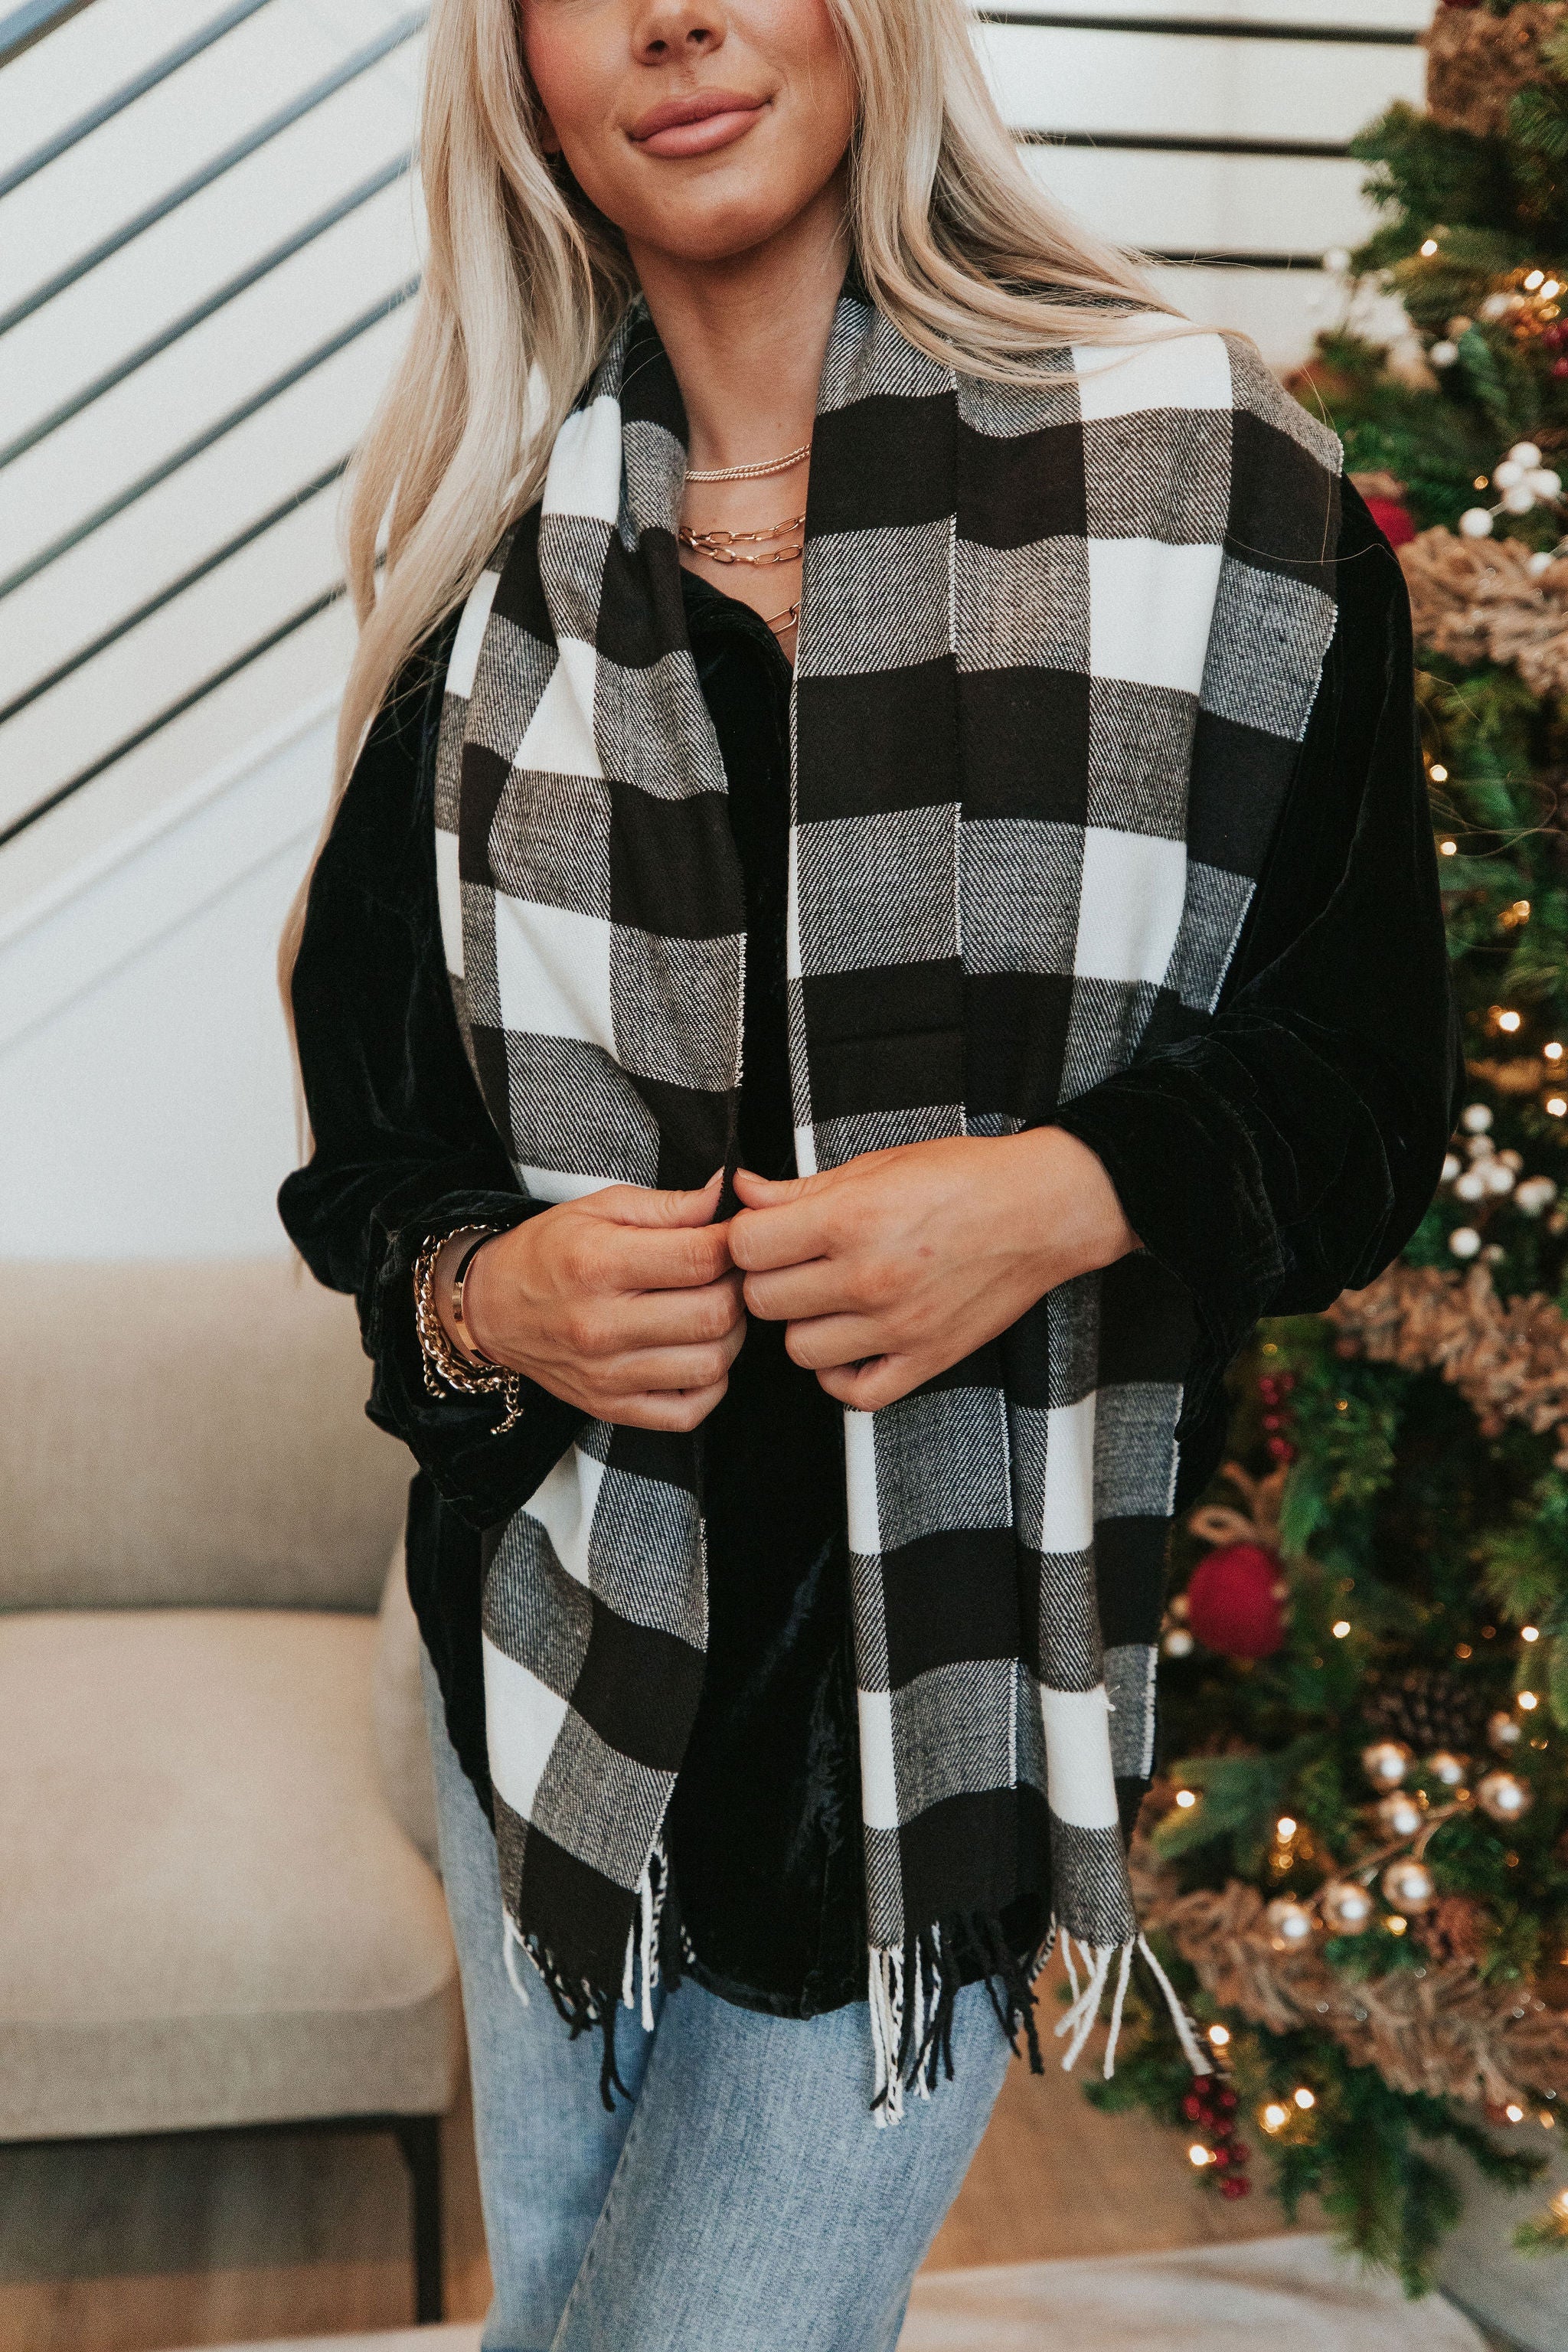 DOORBUSTER Deal! Winter Wishes Plaid Scarf - Black &amp; White